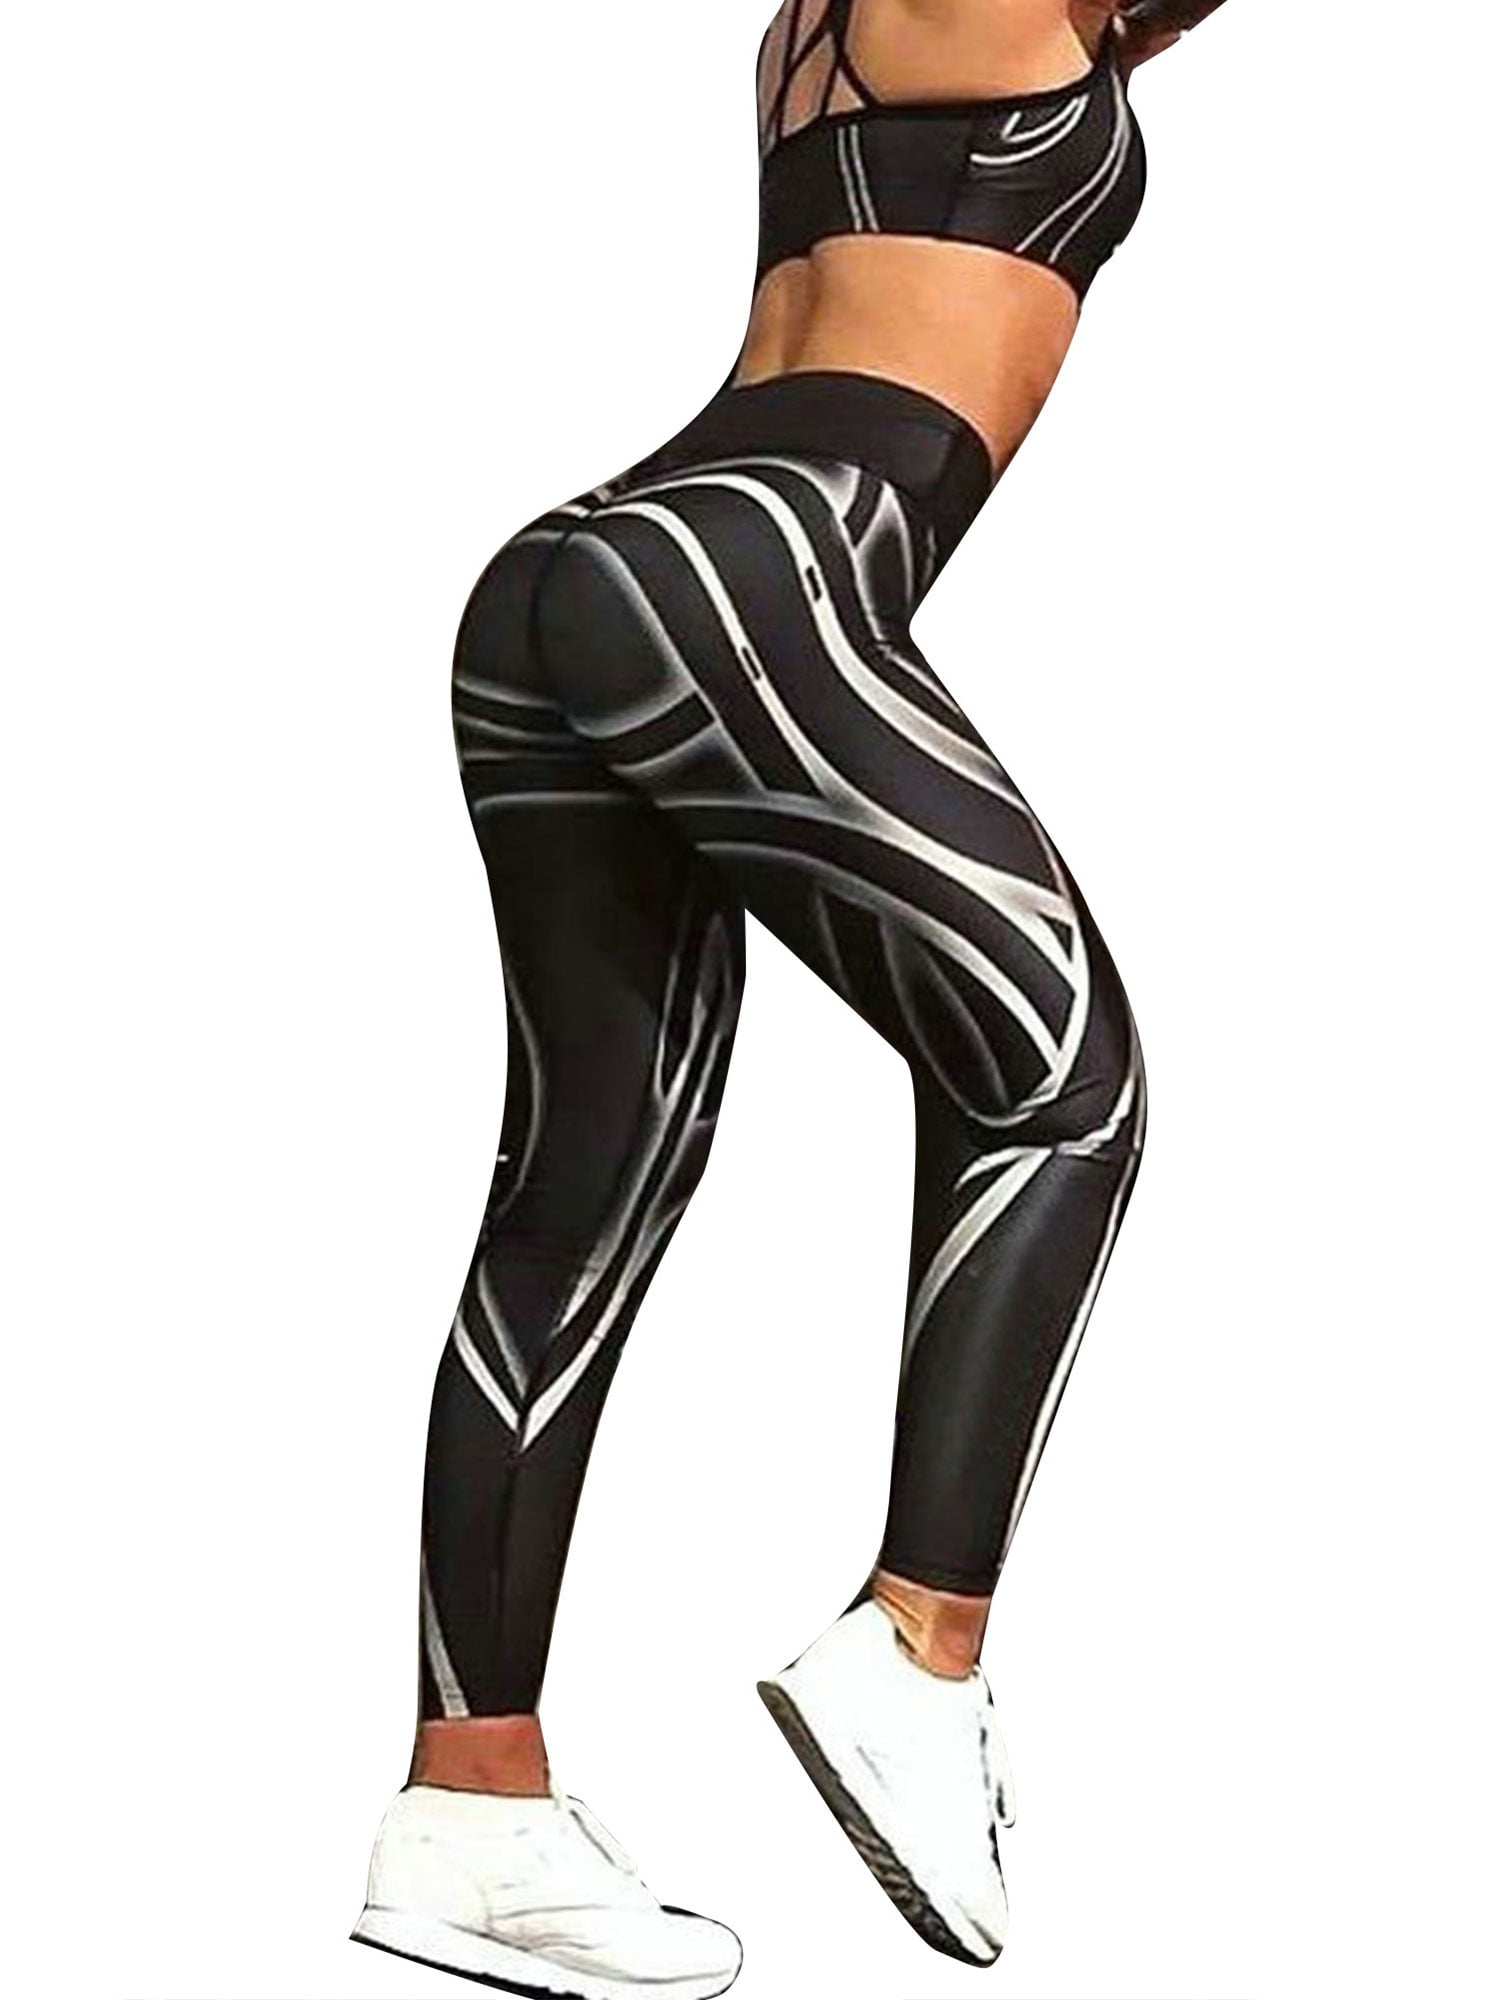 Ladies Girls Womens 3/4 Length Sports Gym Tights Pants with Folding Waist Band 